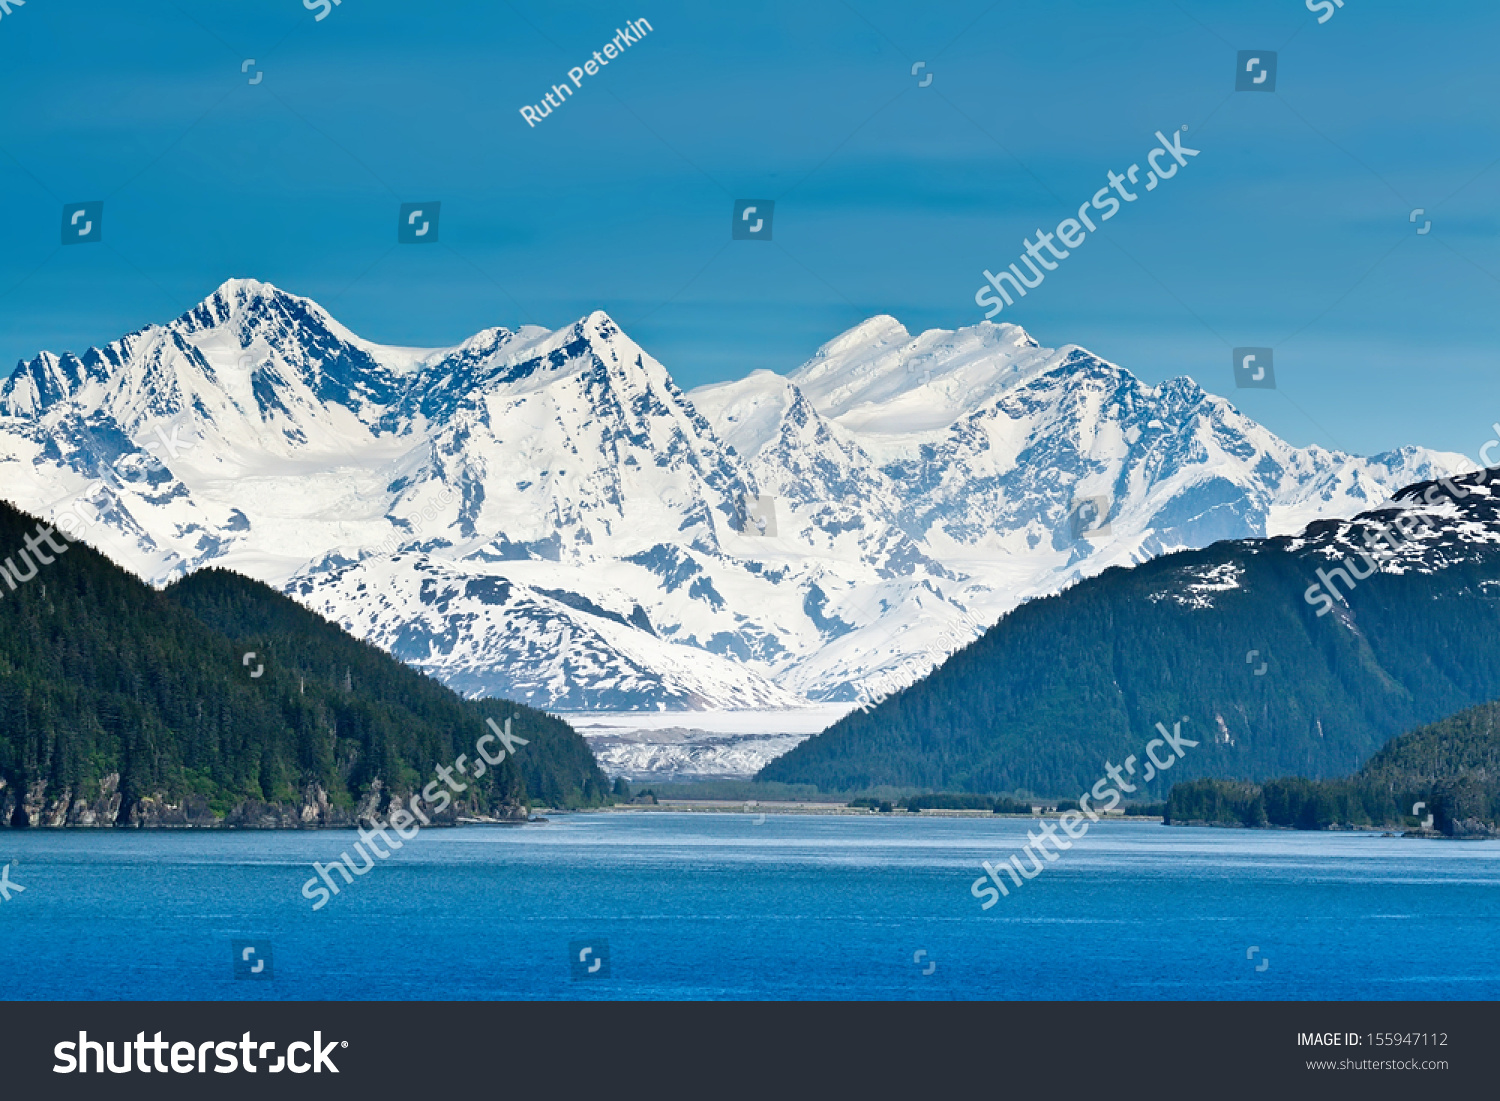 Majestic mountains and extreme wilderness along the Inside Passage #155947112